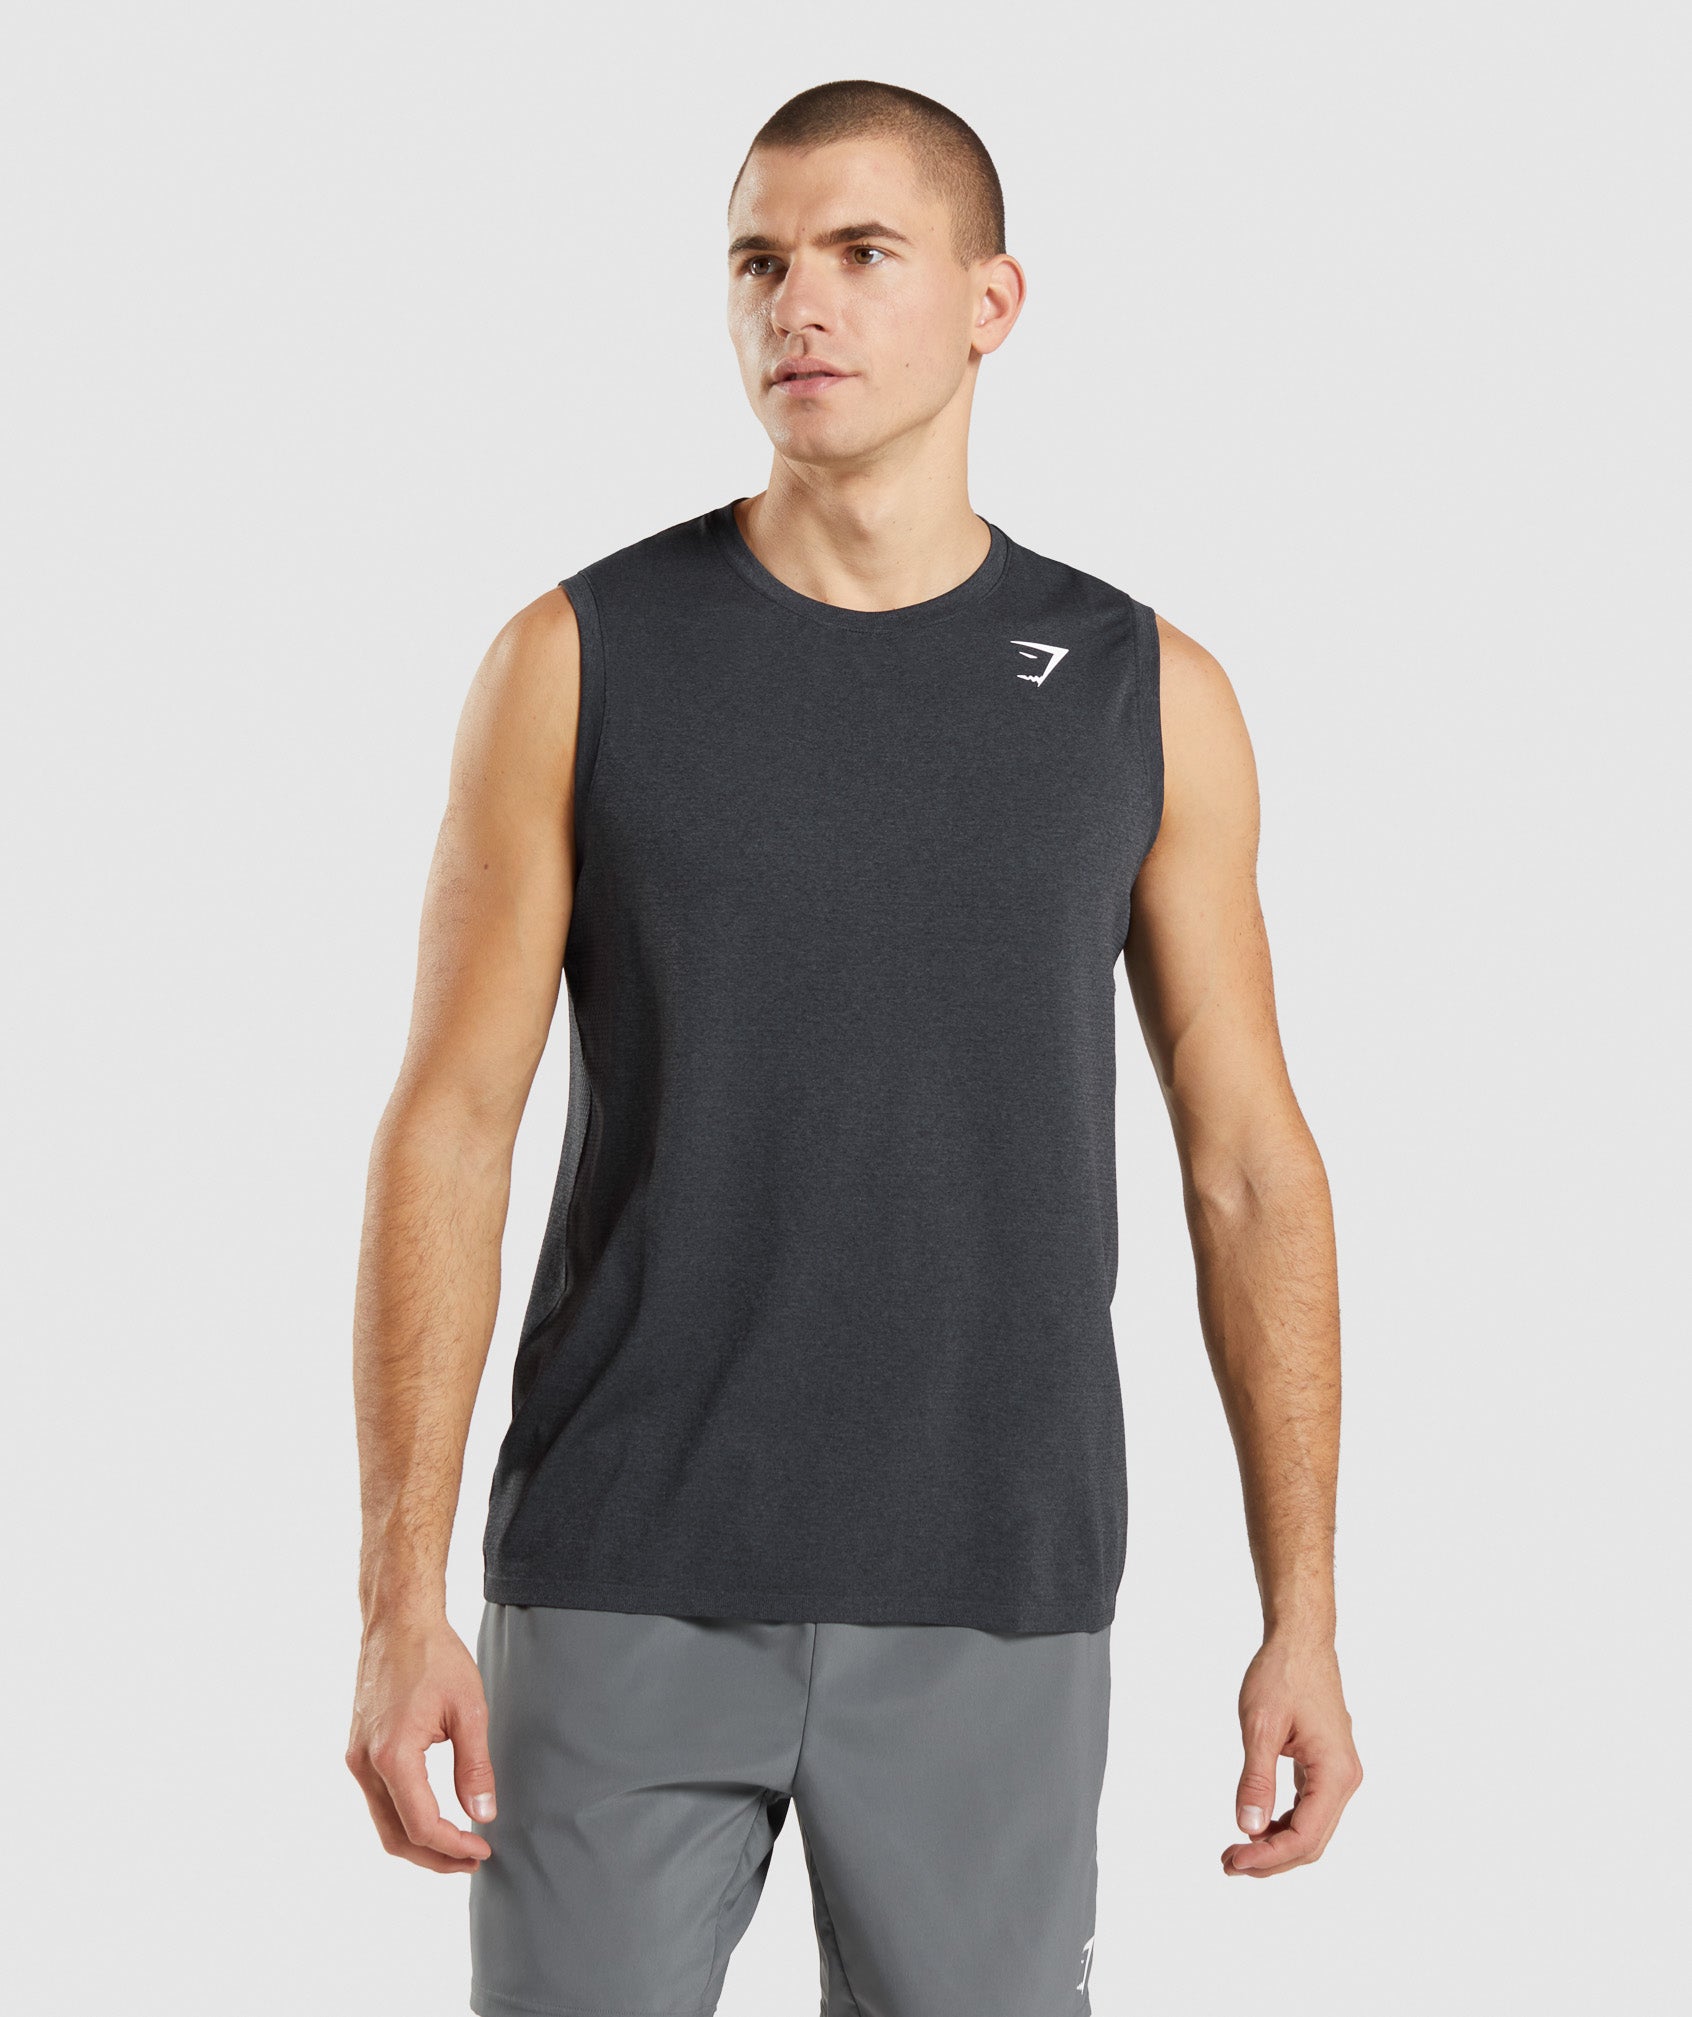 Arrival Seamless Tank in Black Marl - view 1